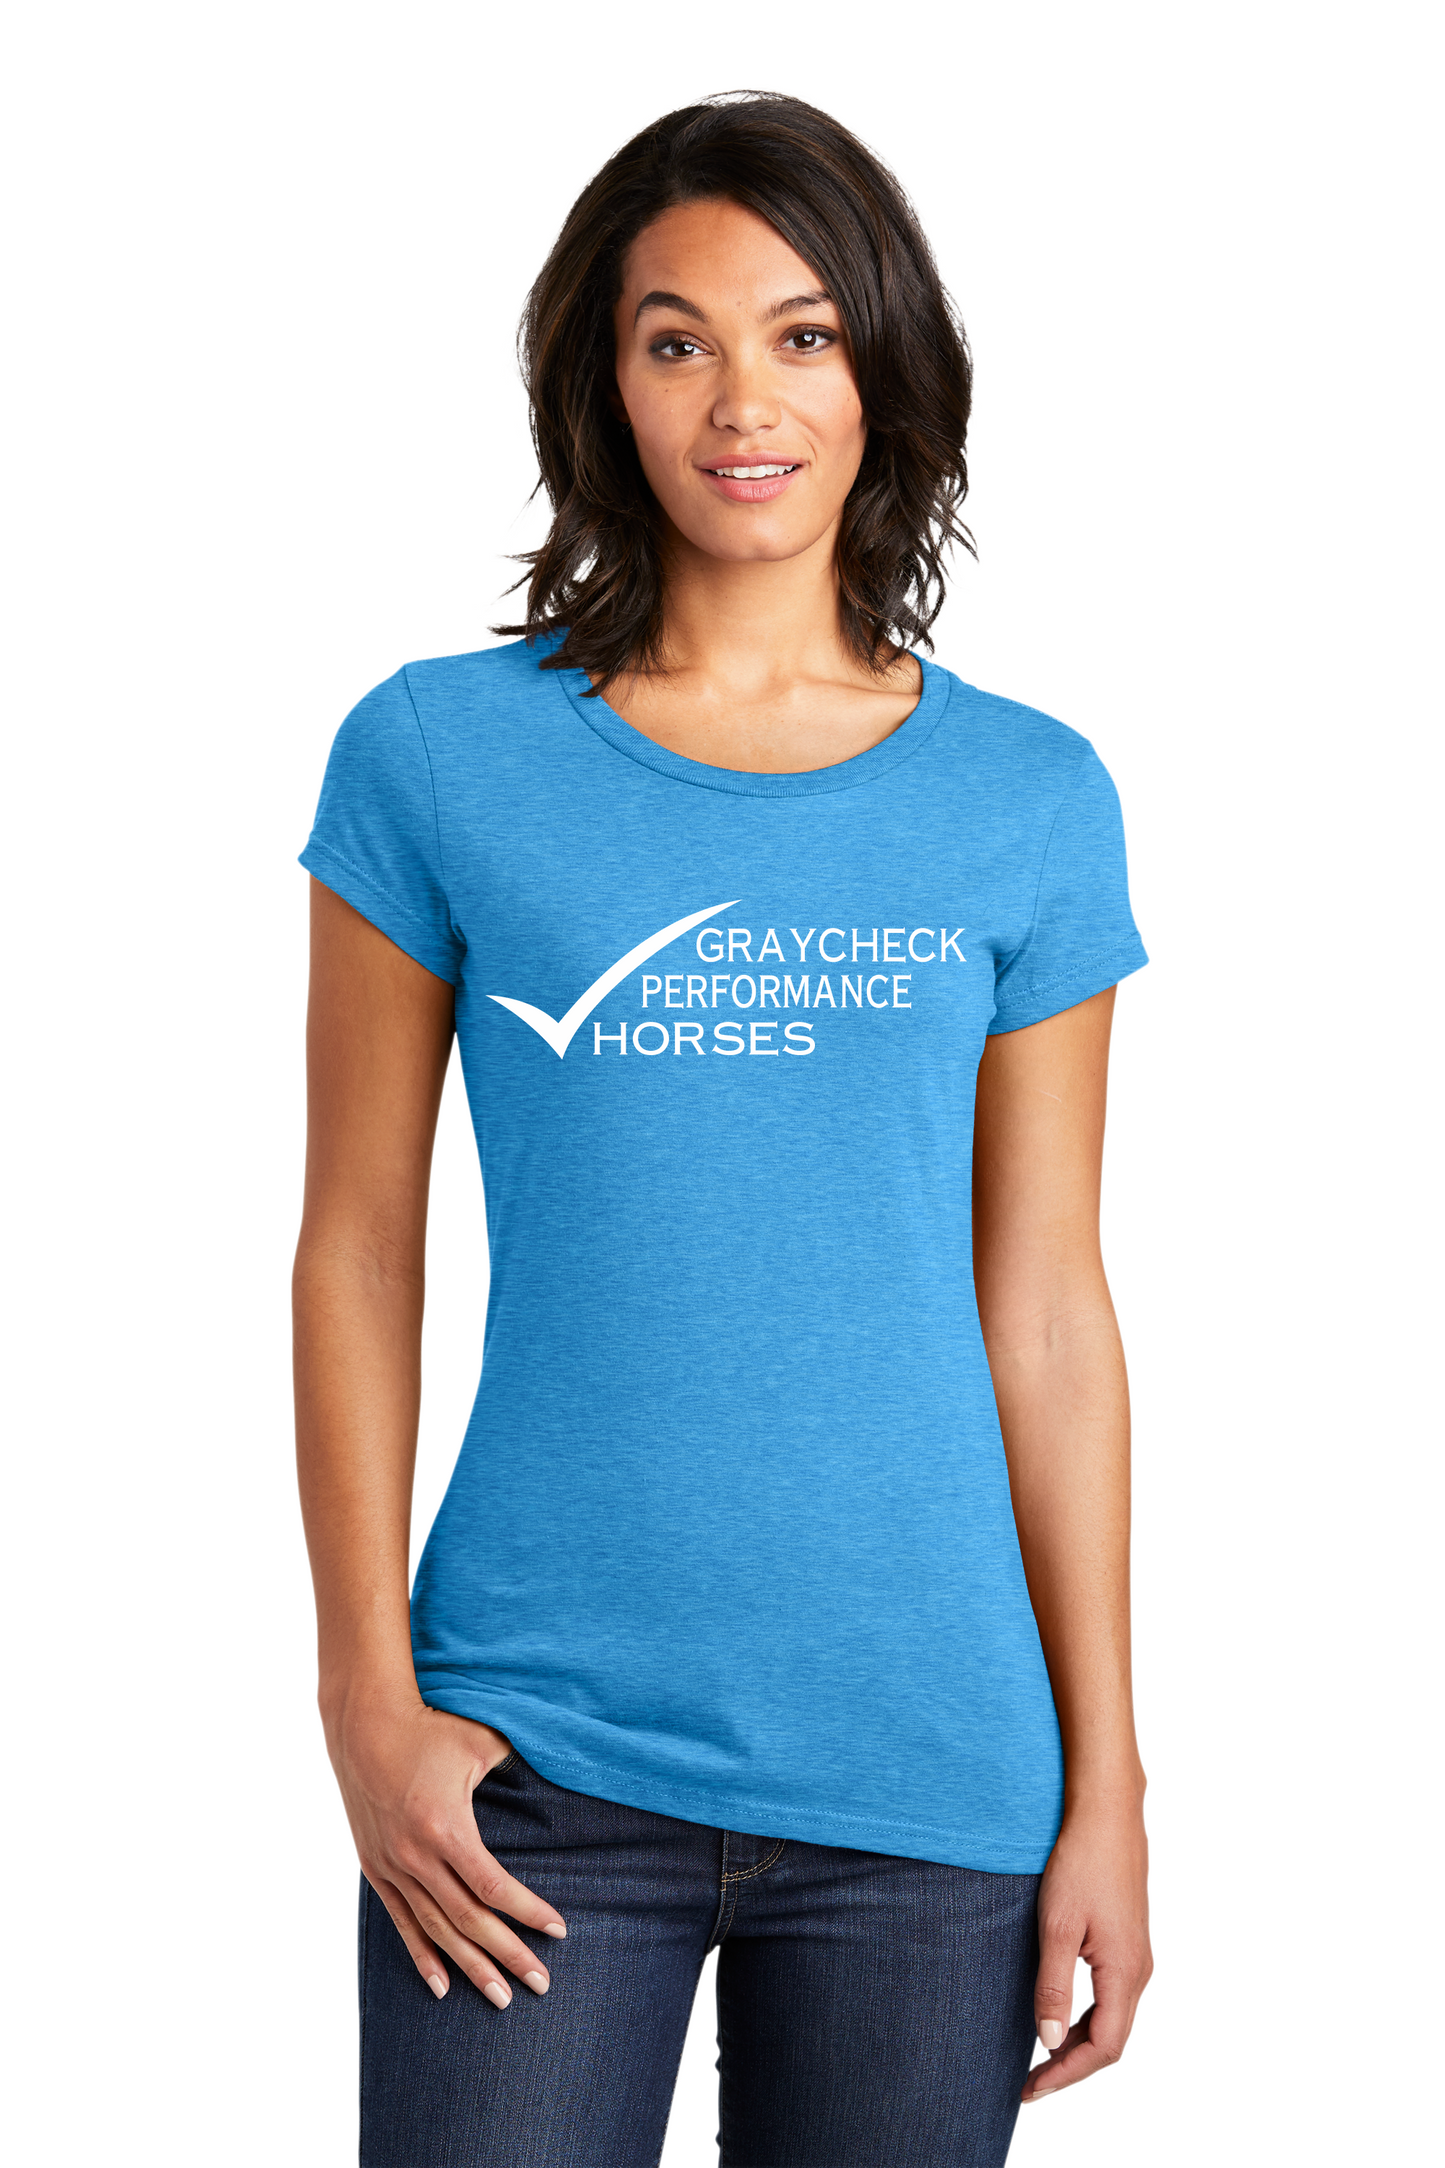 Graycheck- Women's fitted Tee